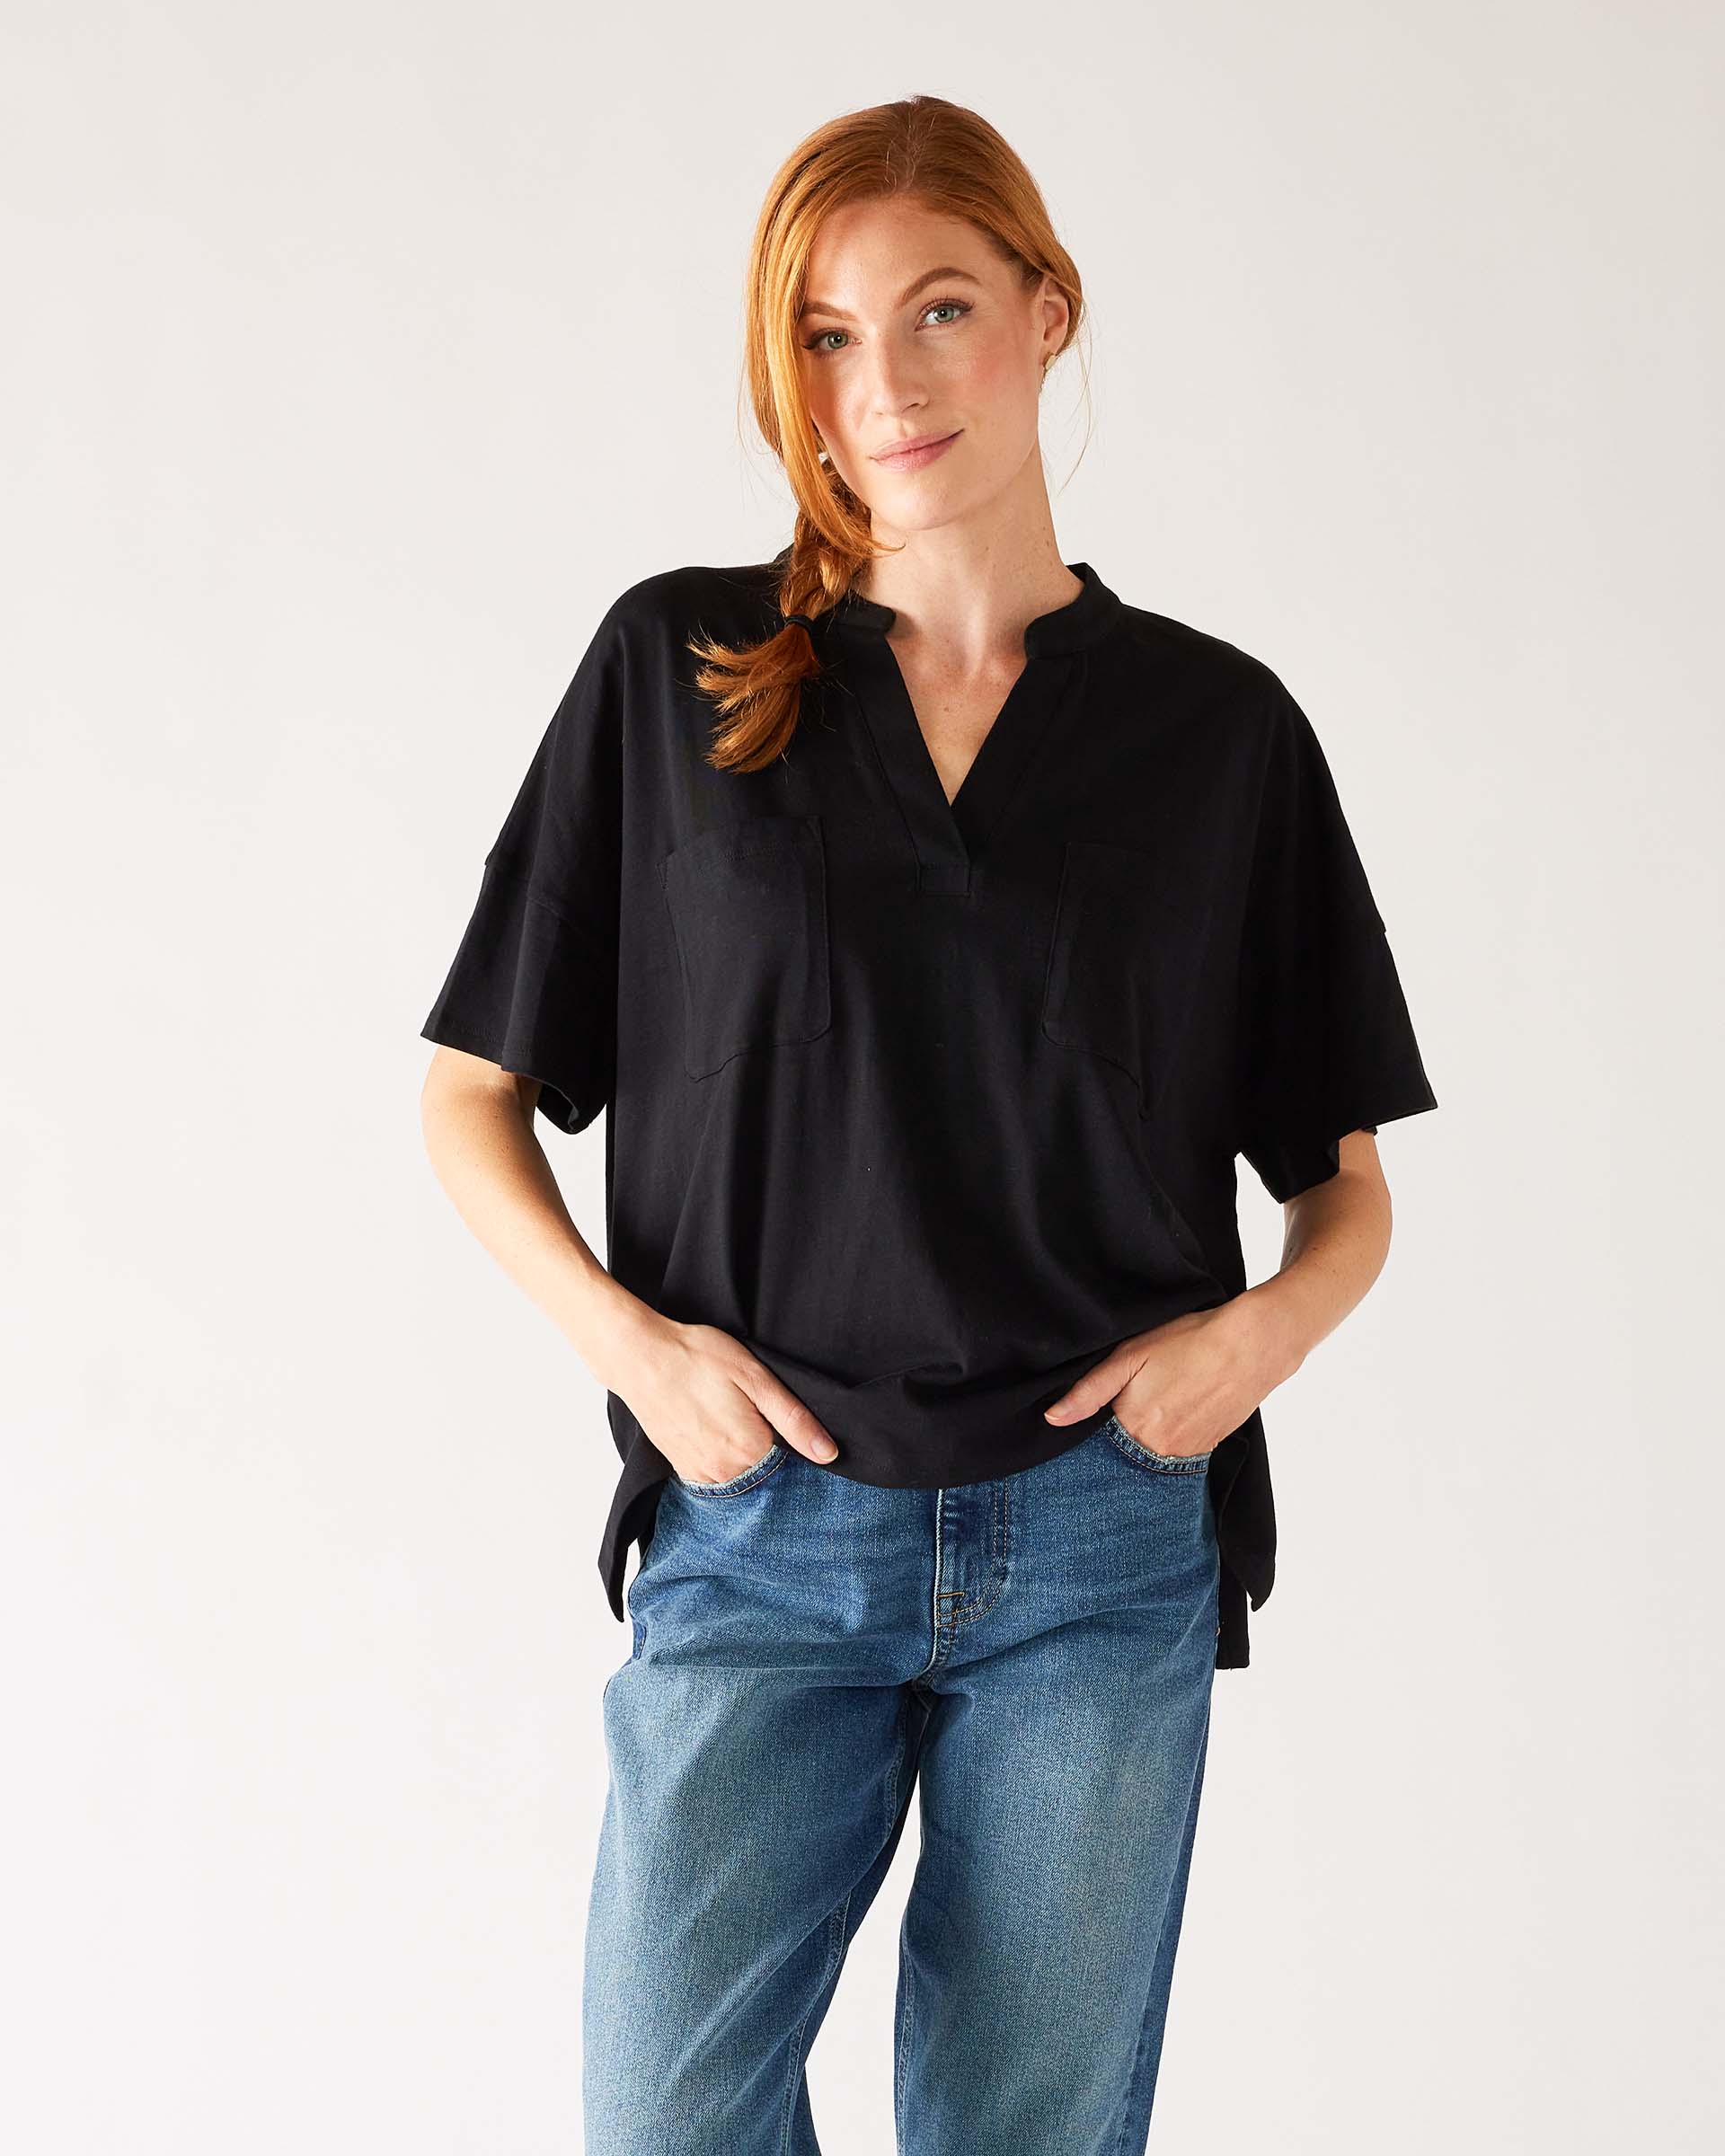 Women's One Size Black Short Sleeve Tee with Two Pockets on Chest Front View